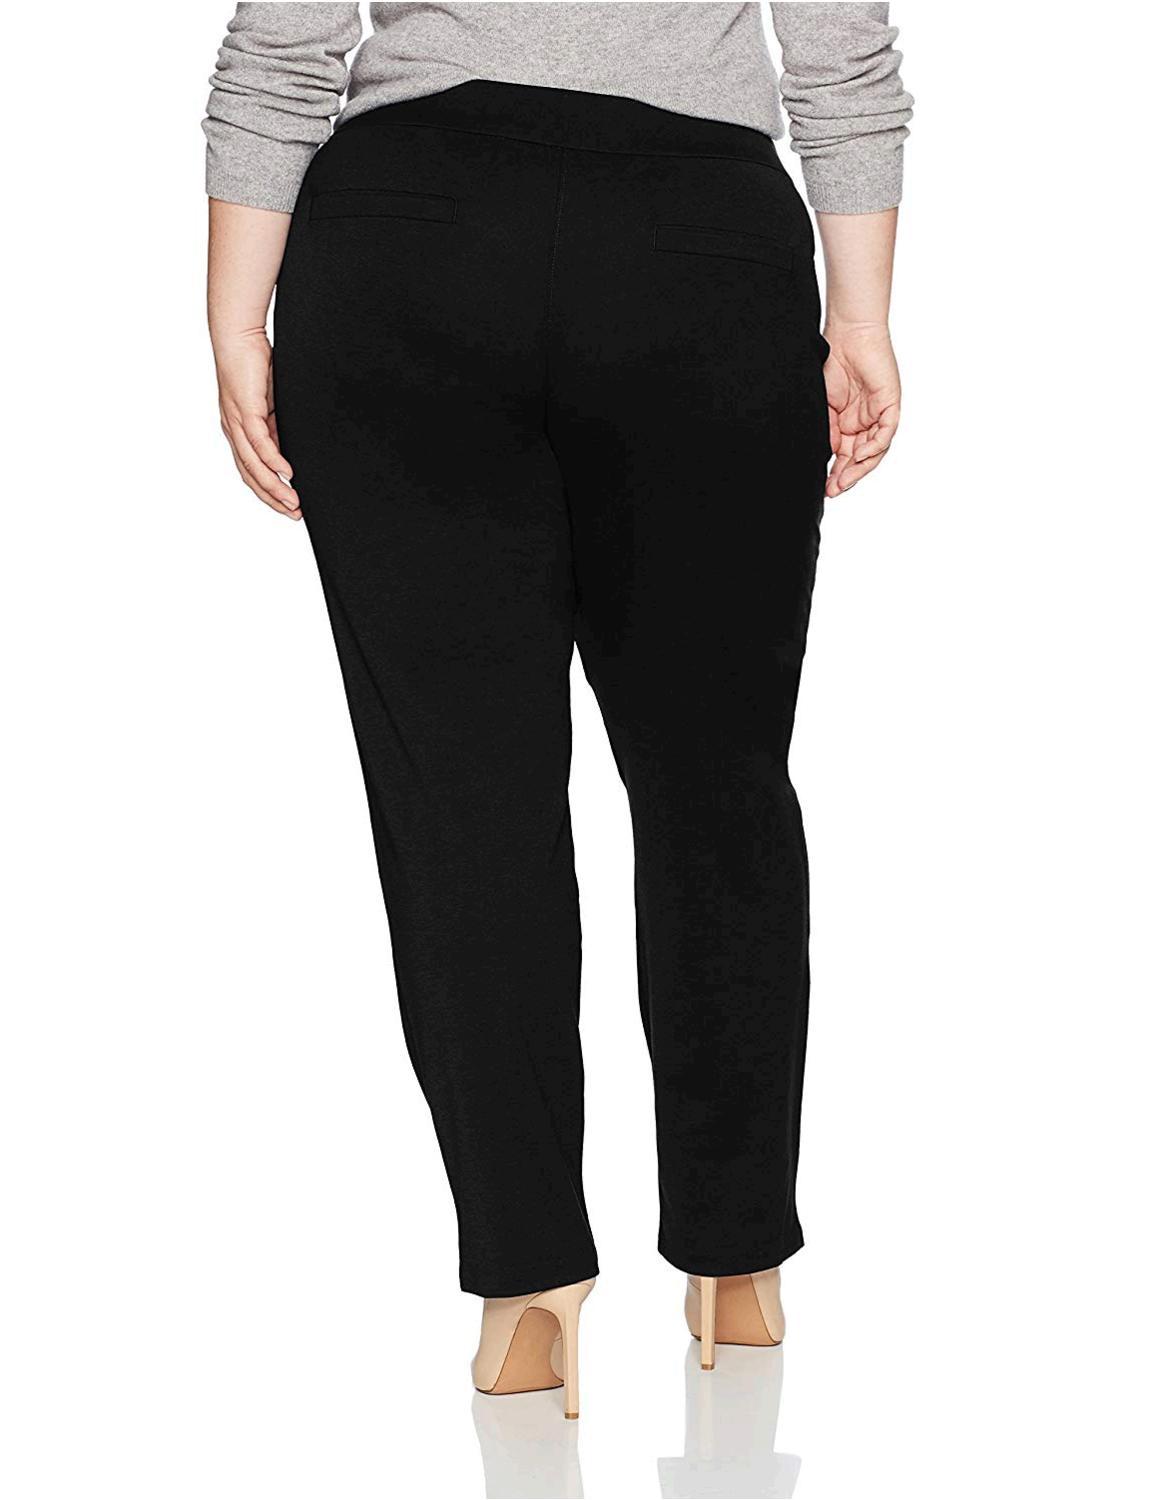 Chic Classic Collection Womens Plus Size Knit Pull On Pant  Black  20P Black 5bdc1eaa71a95a 